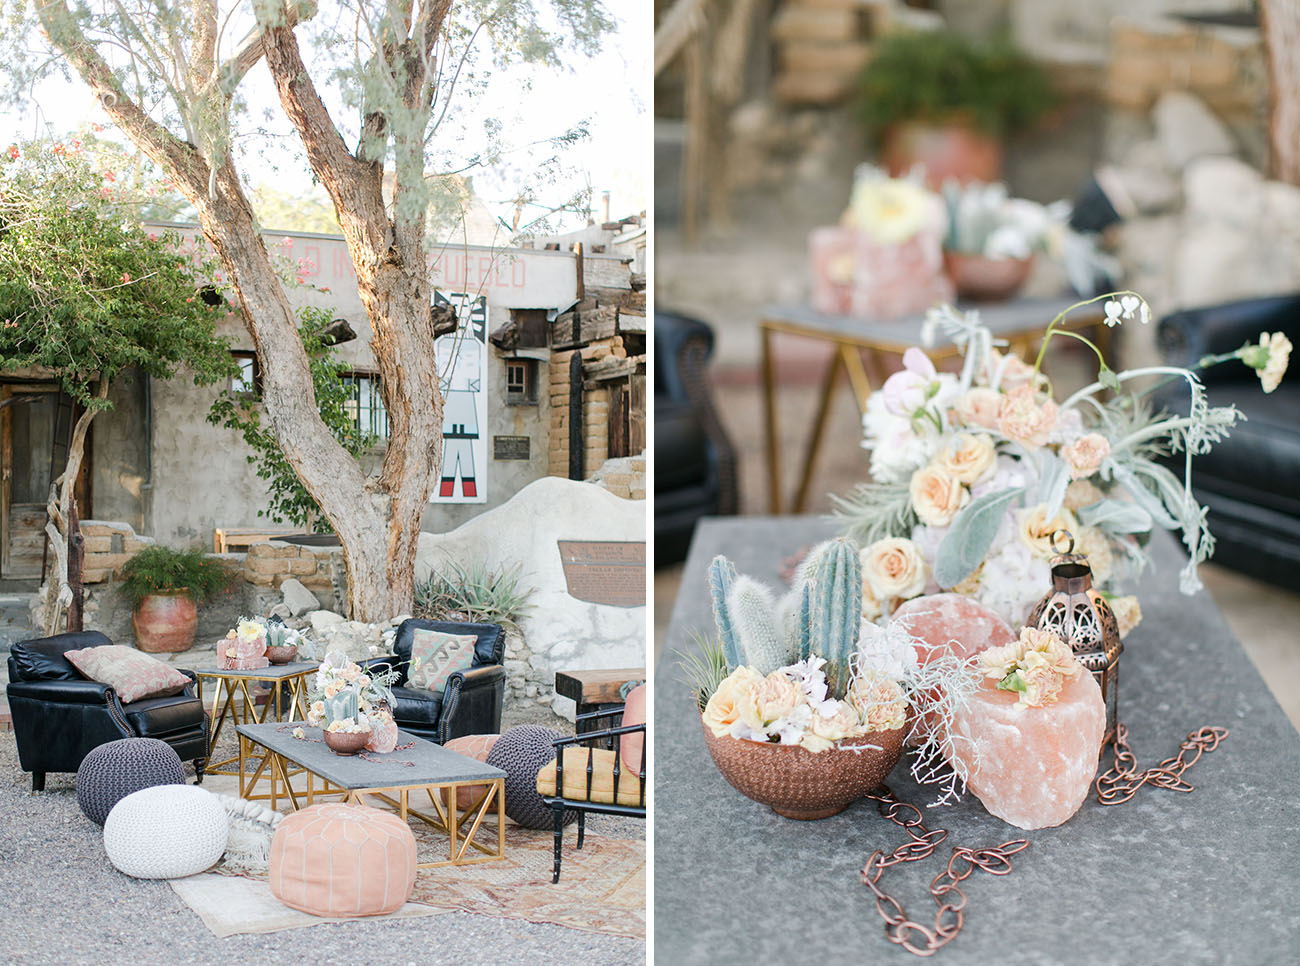 Eclectic and Rustic Wedding Inspiration